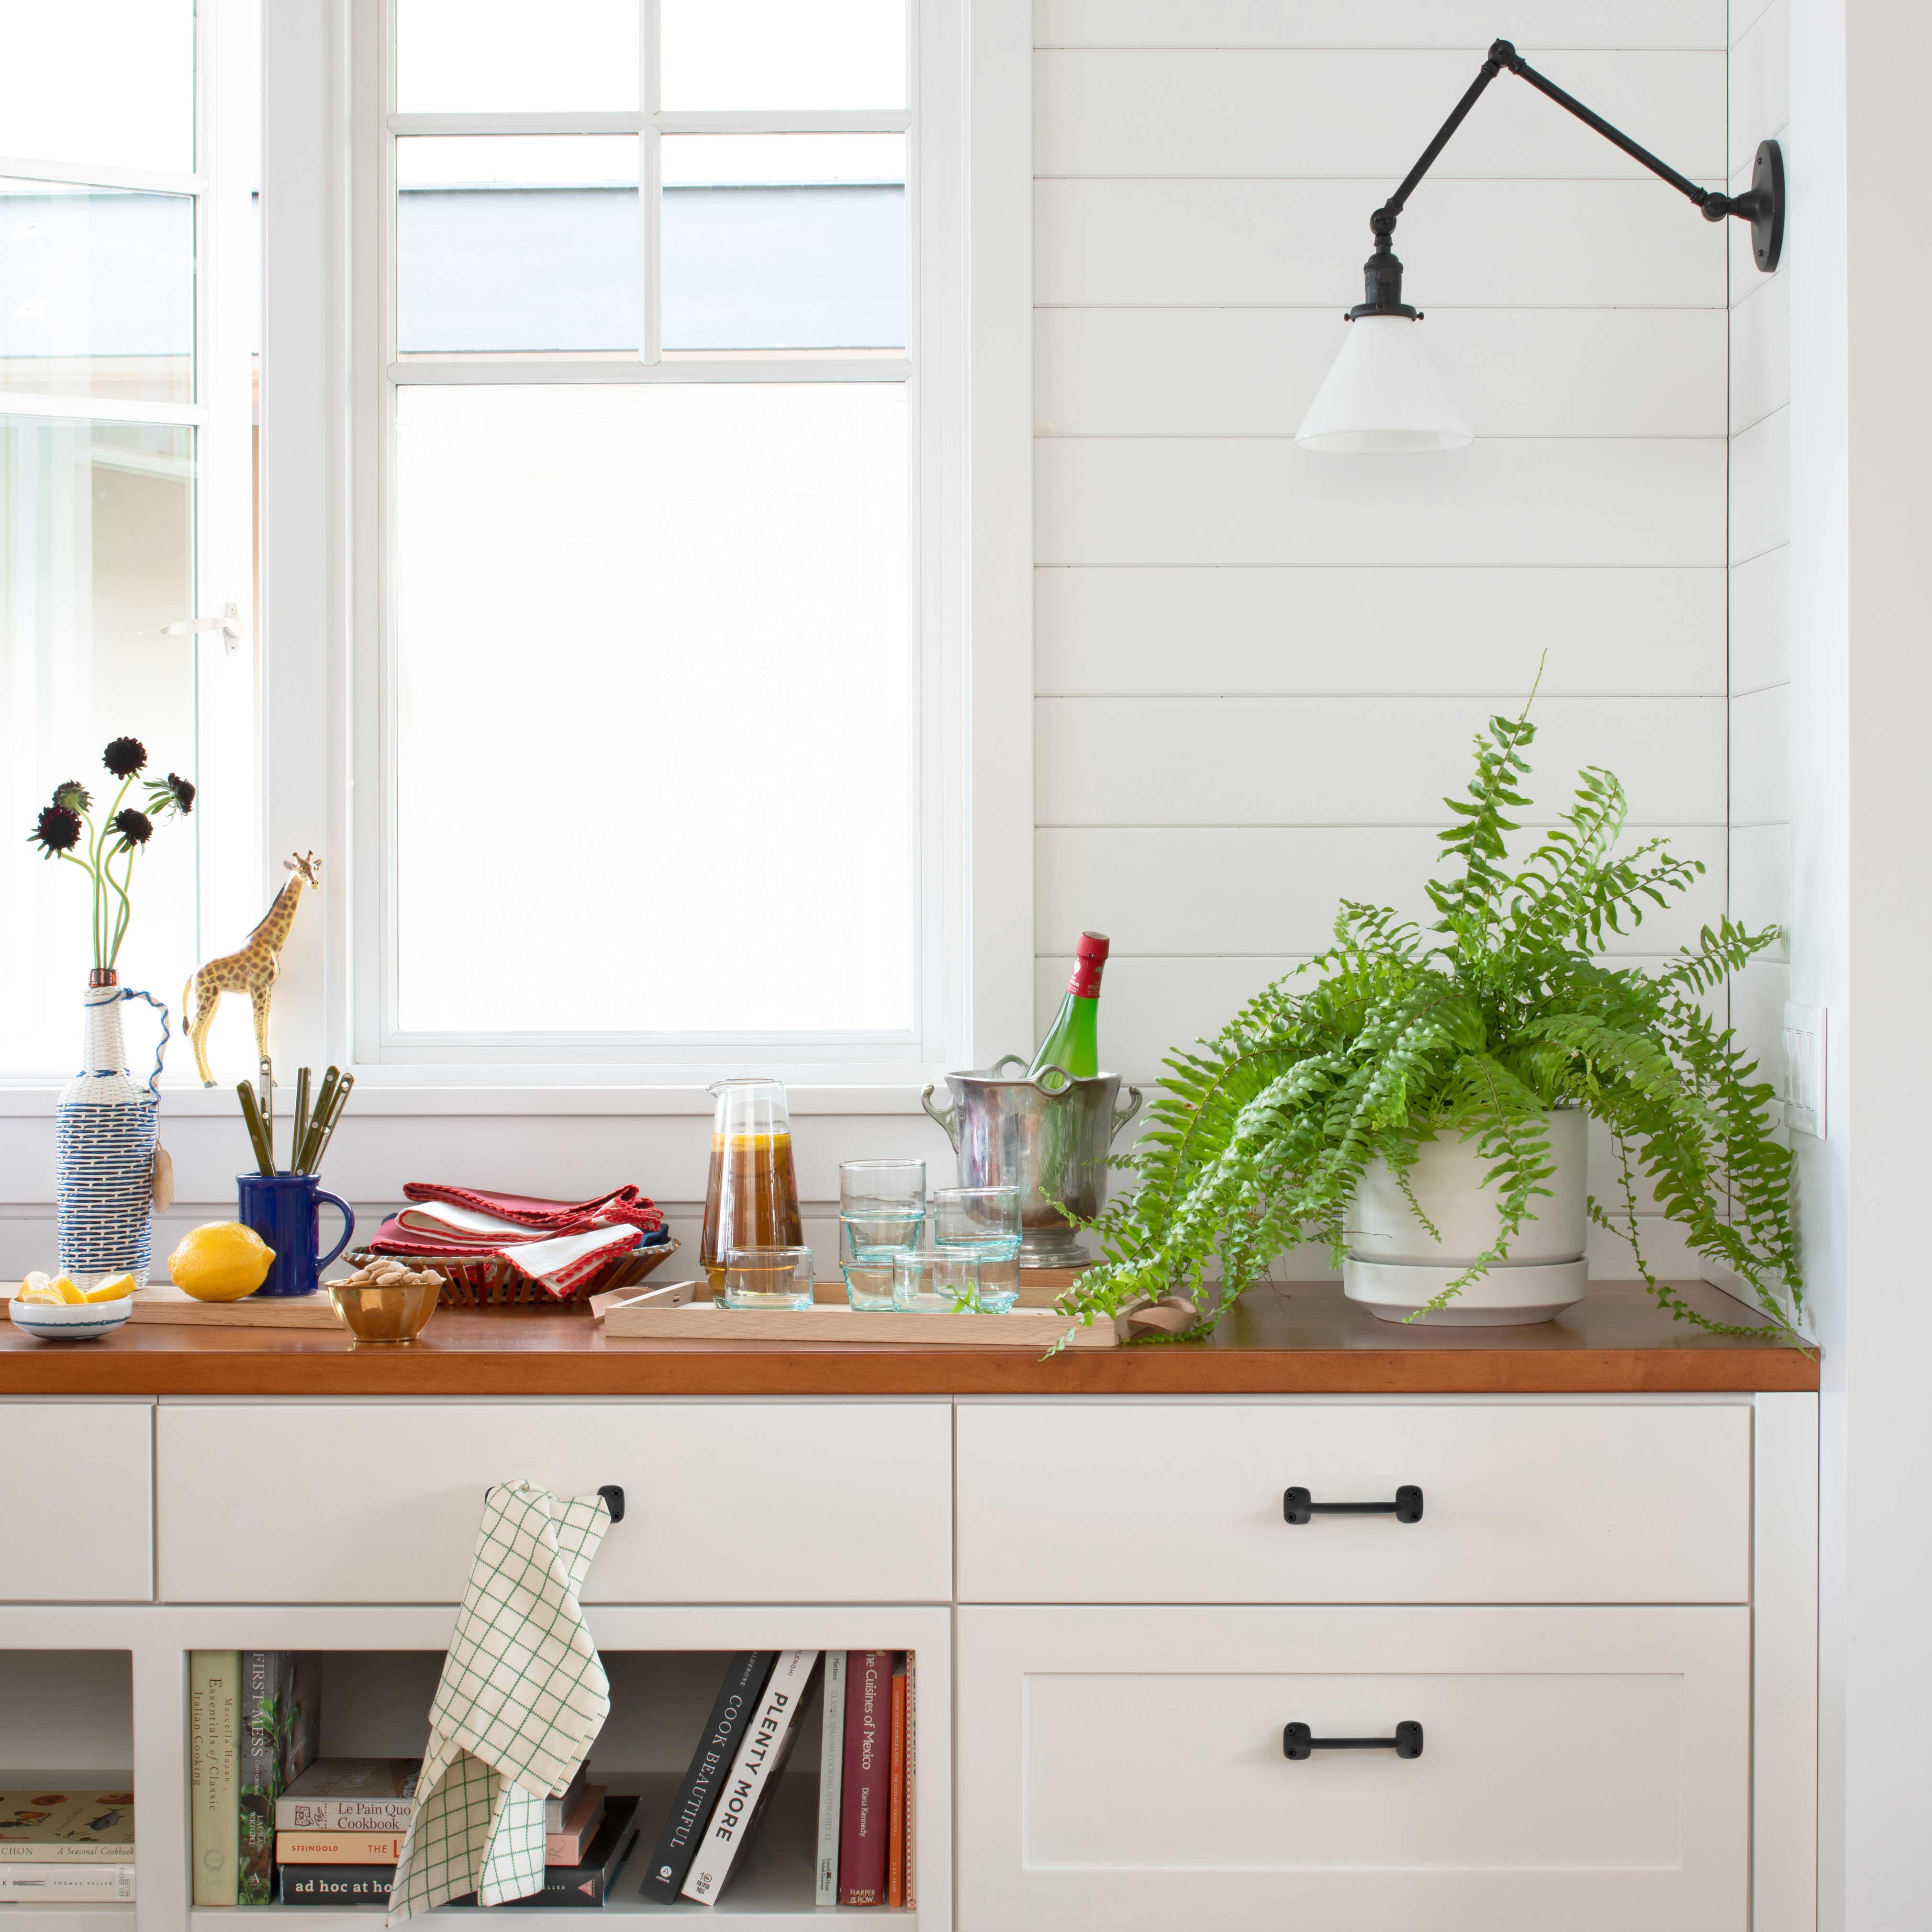 Bright kitchen counter with various hosting and kitchen essentials scattered across it and a larger fern in a white planter.